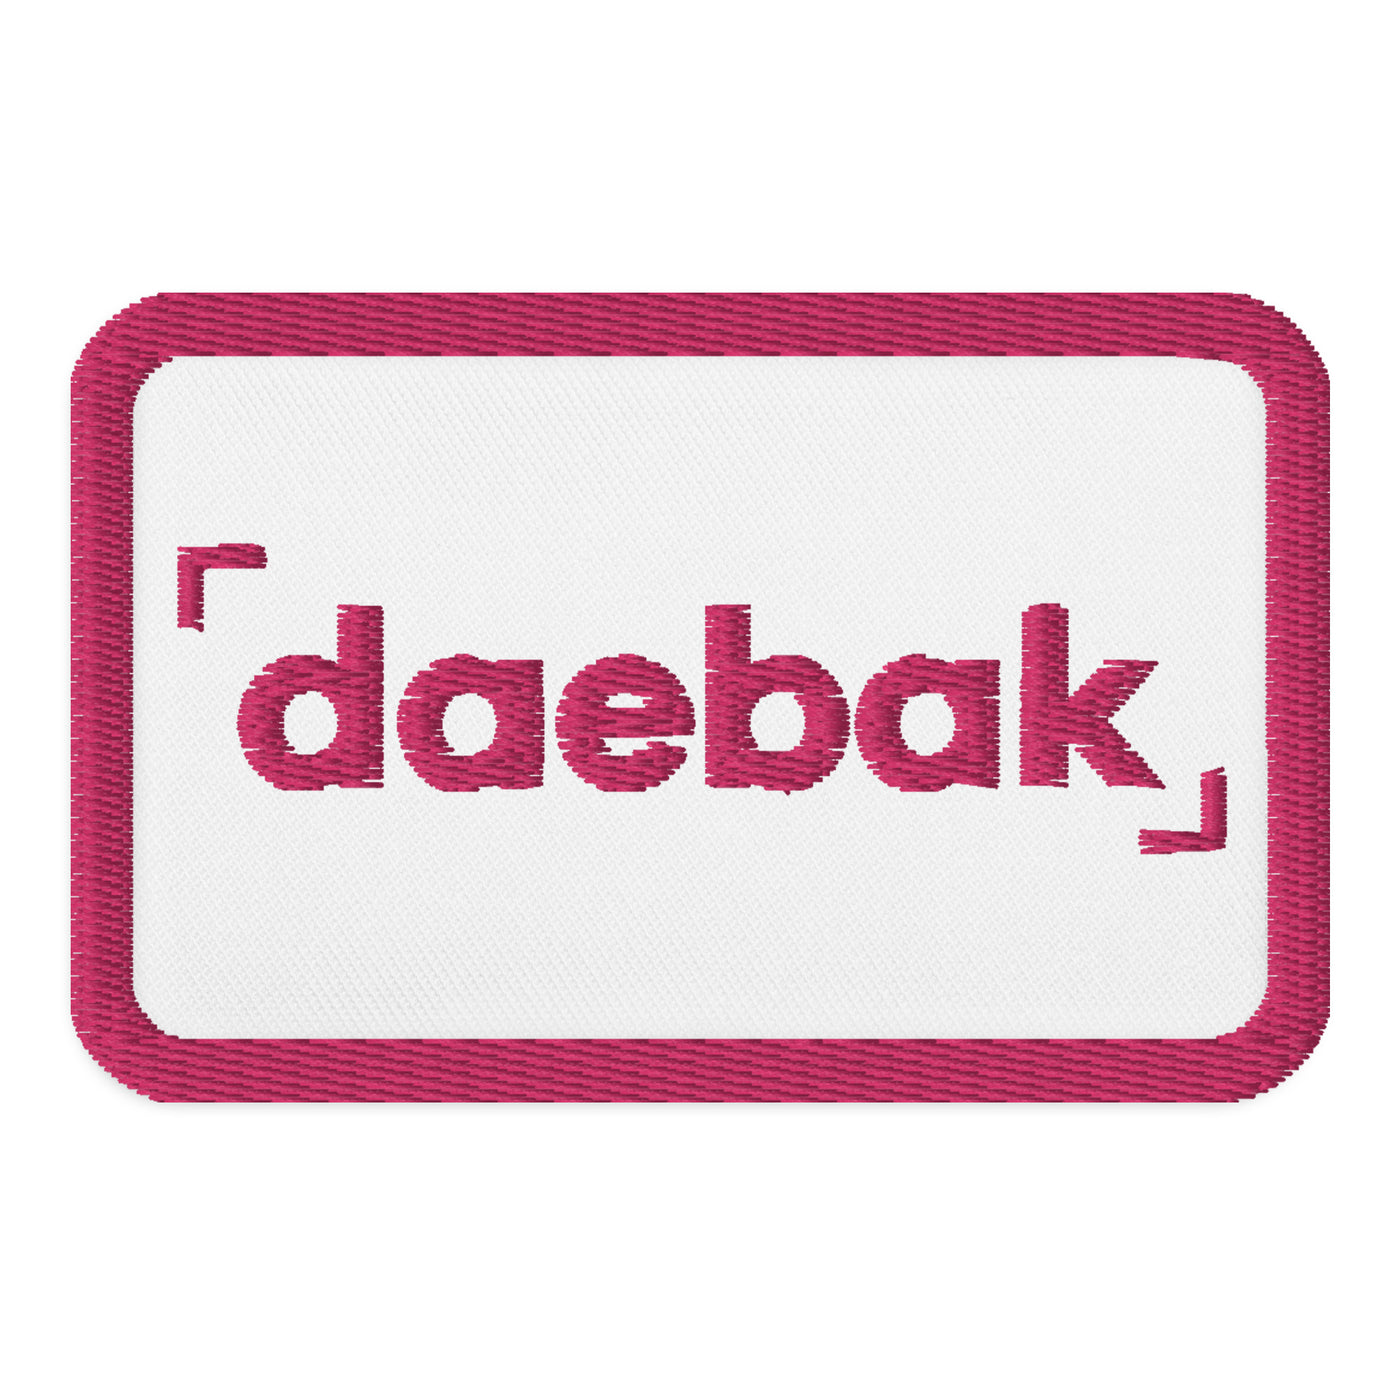 Daebak Embroidered Patch - Pink Logo